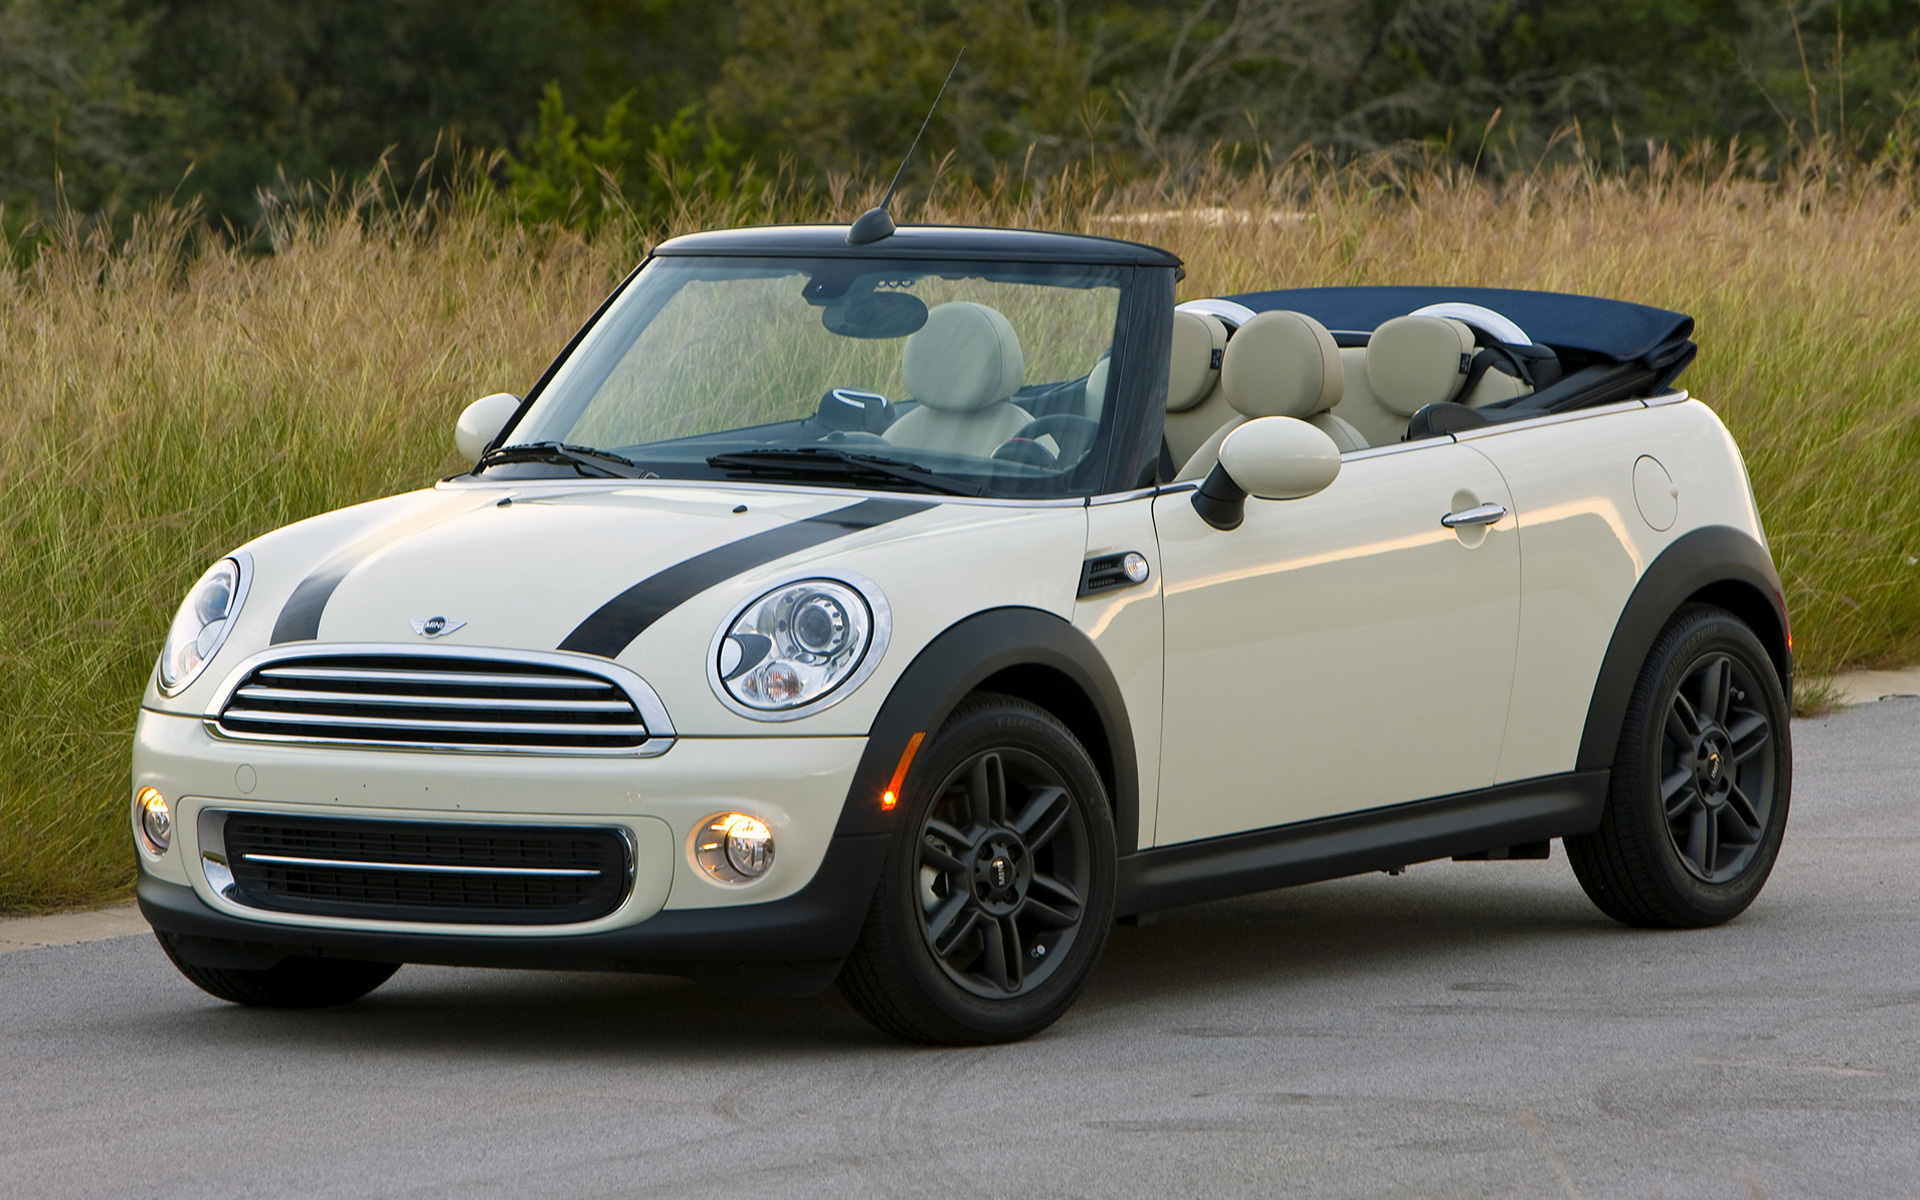 2010 Mini Cooper Convertible (US) - Wallpapers and HD Images | Car Pixel